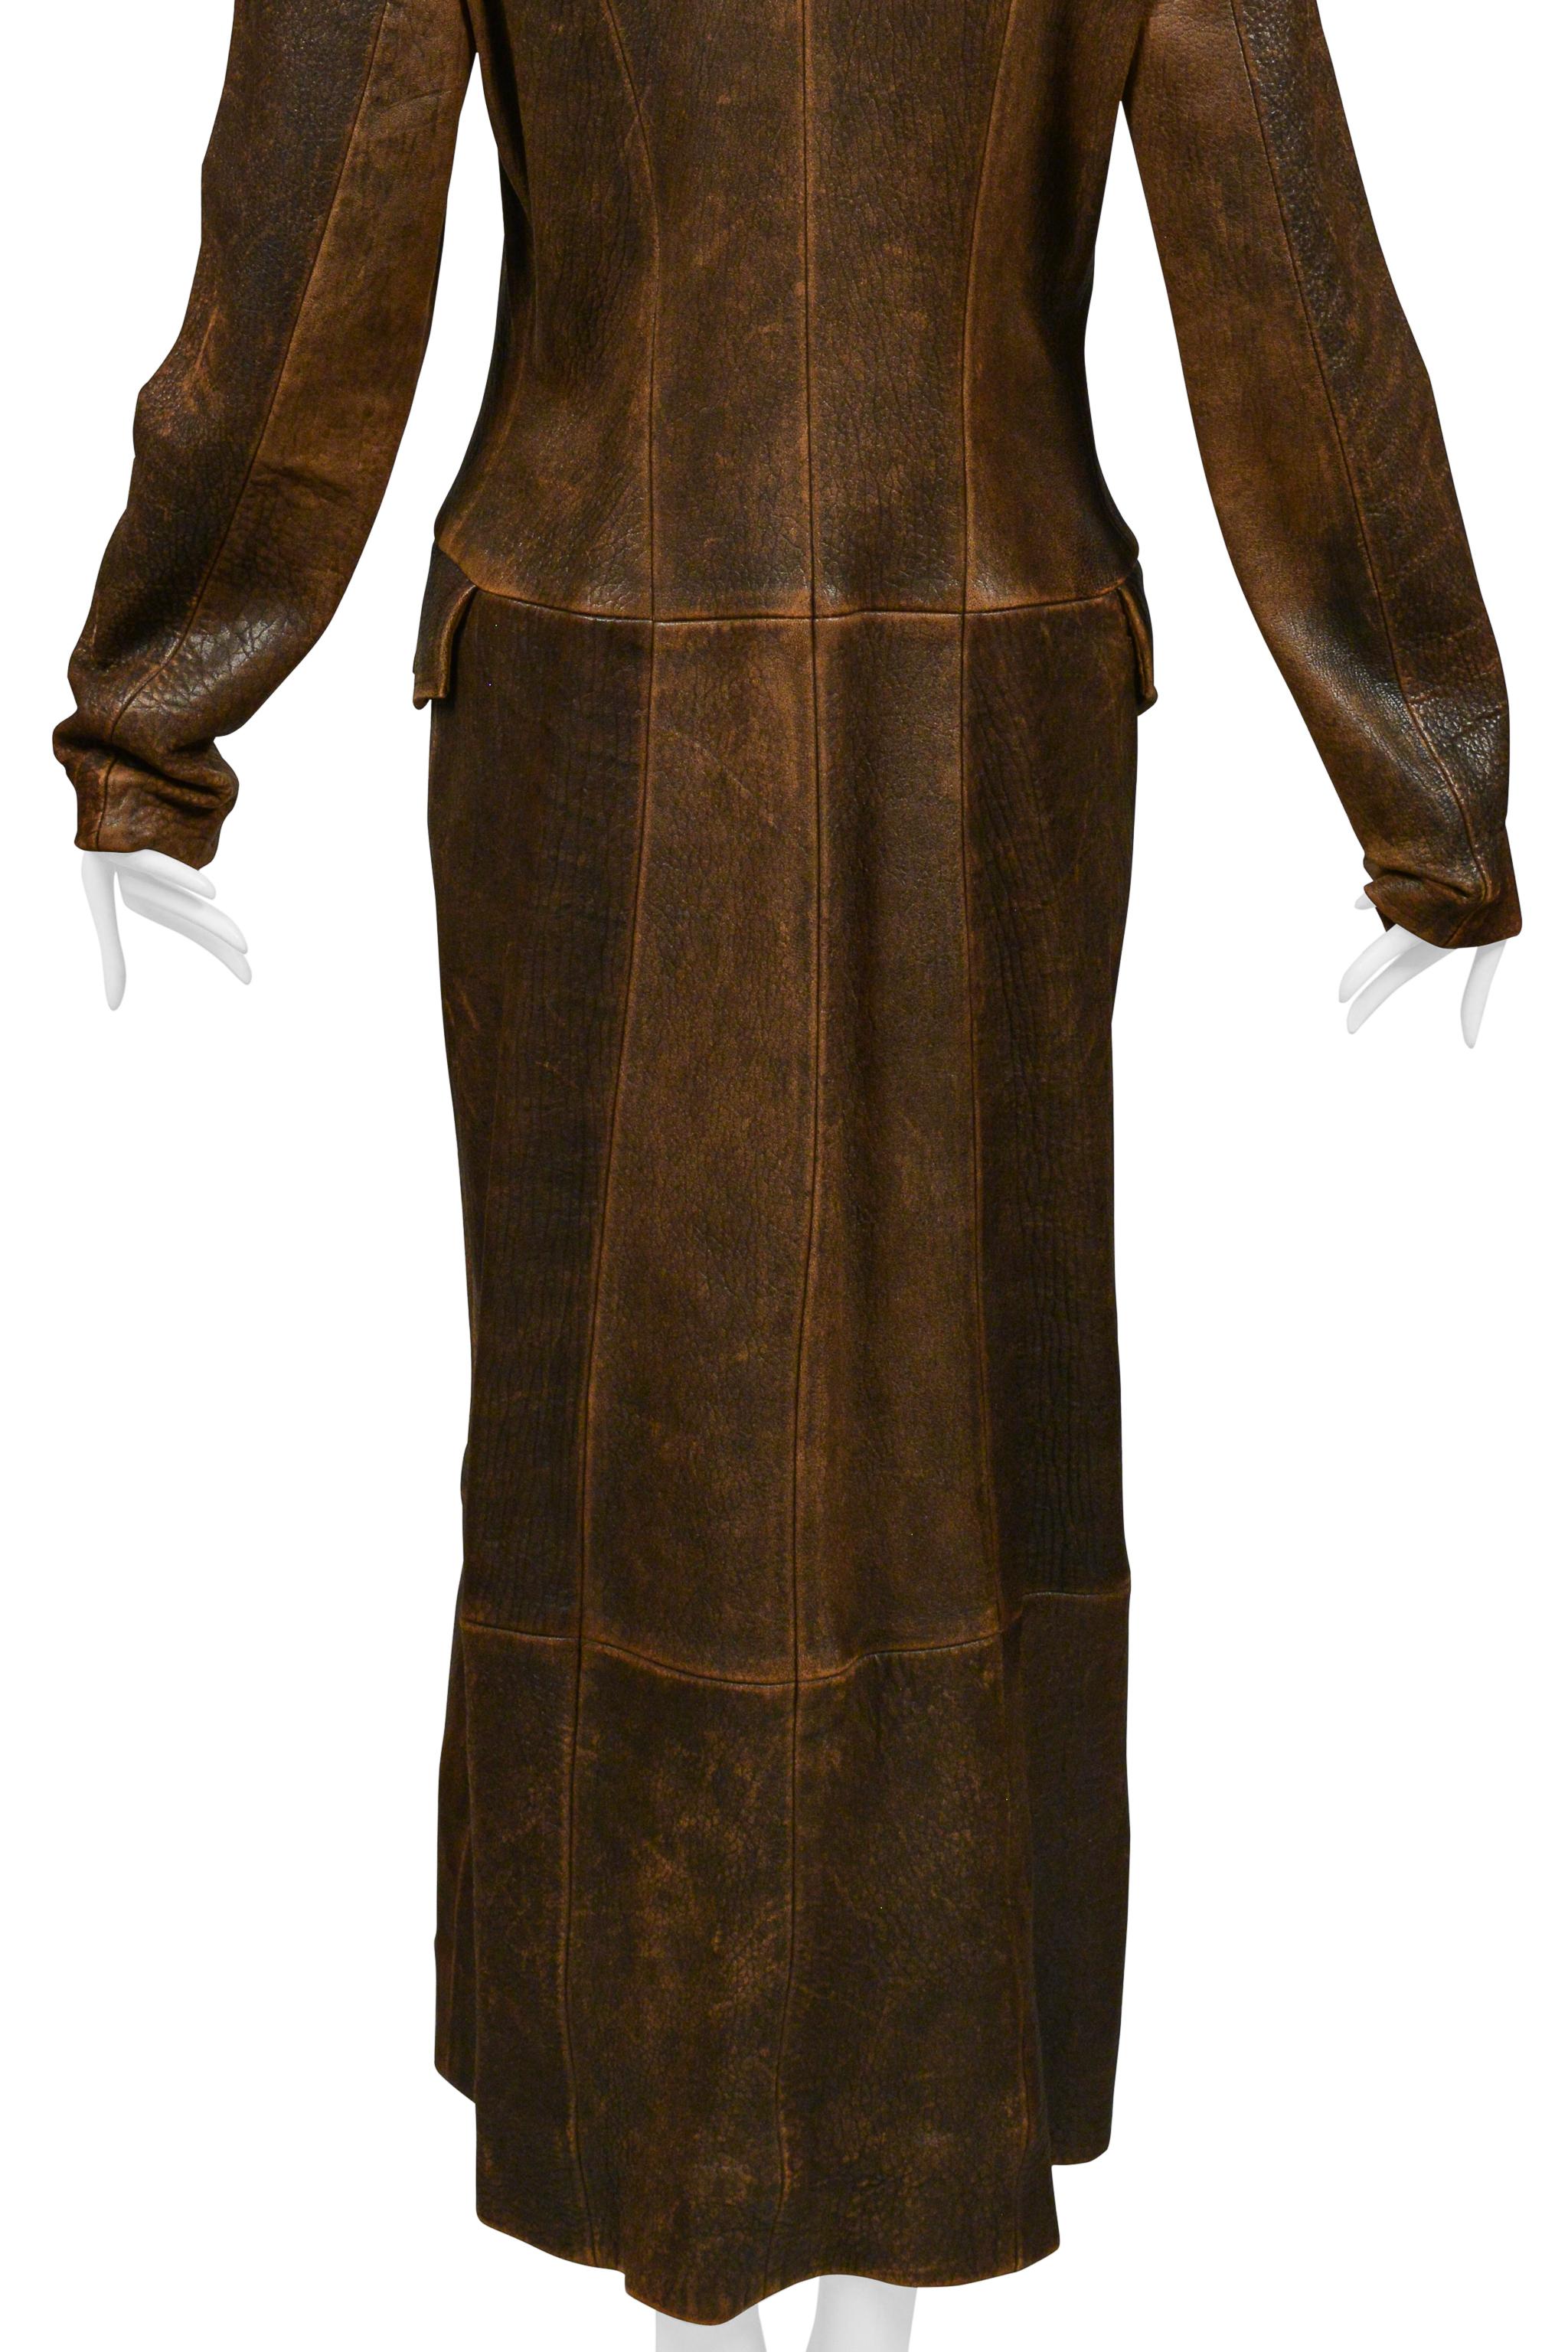 North Beach Leather Brown Distressed Duster For Sale 2